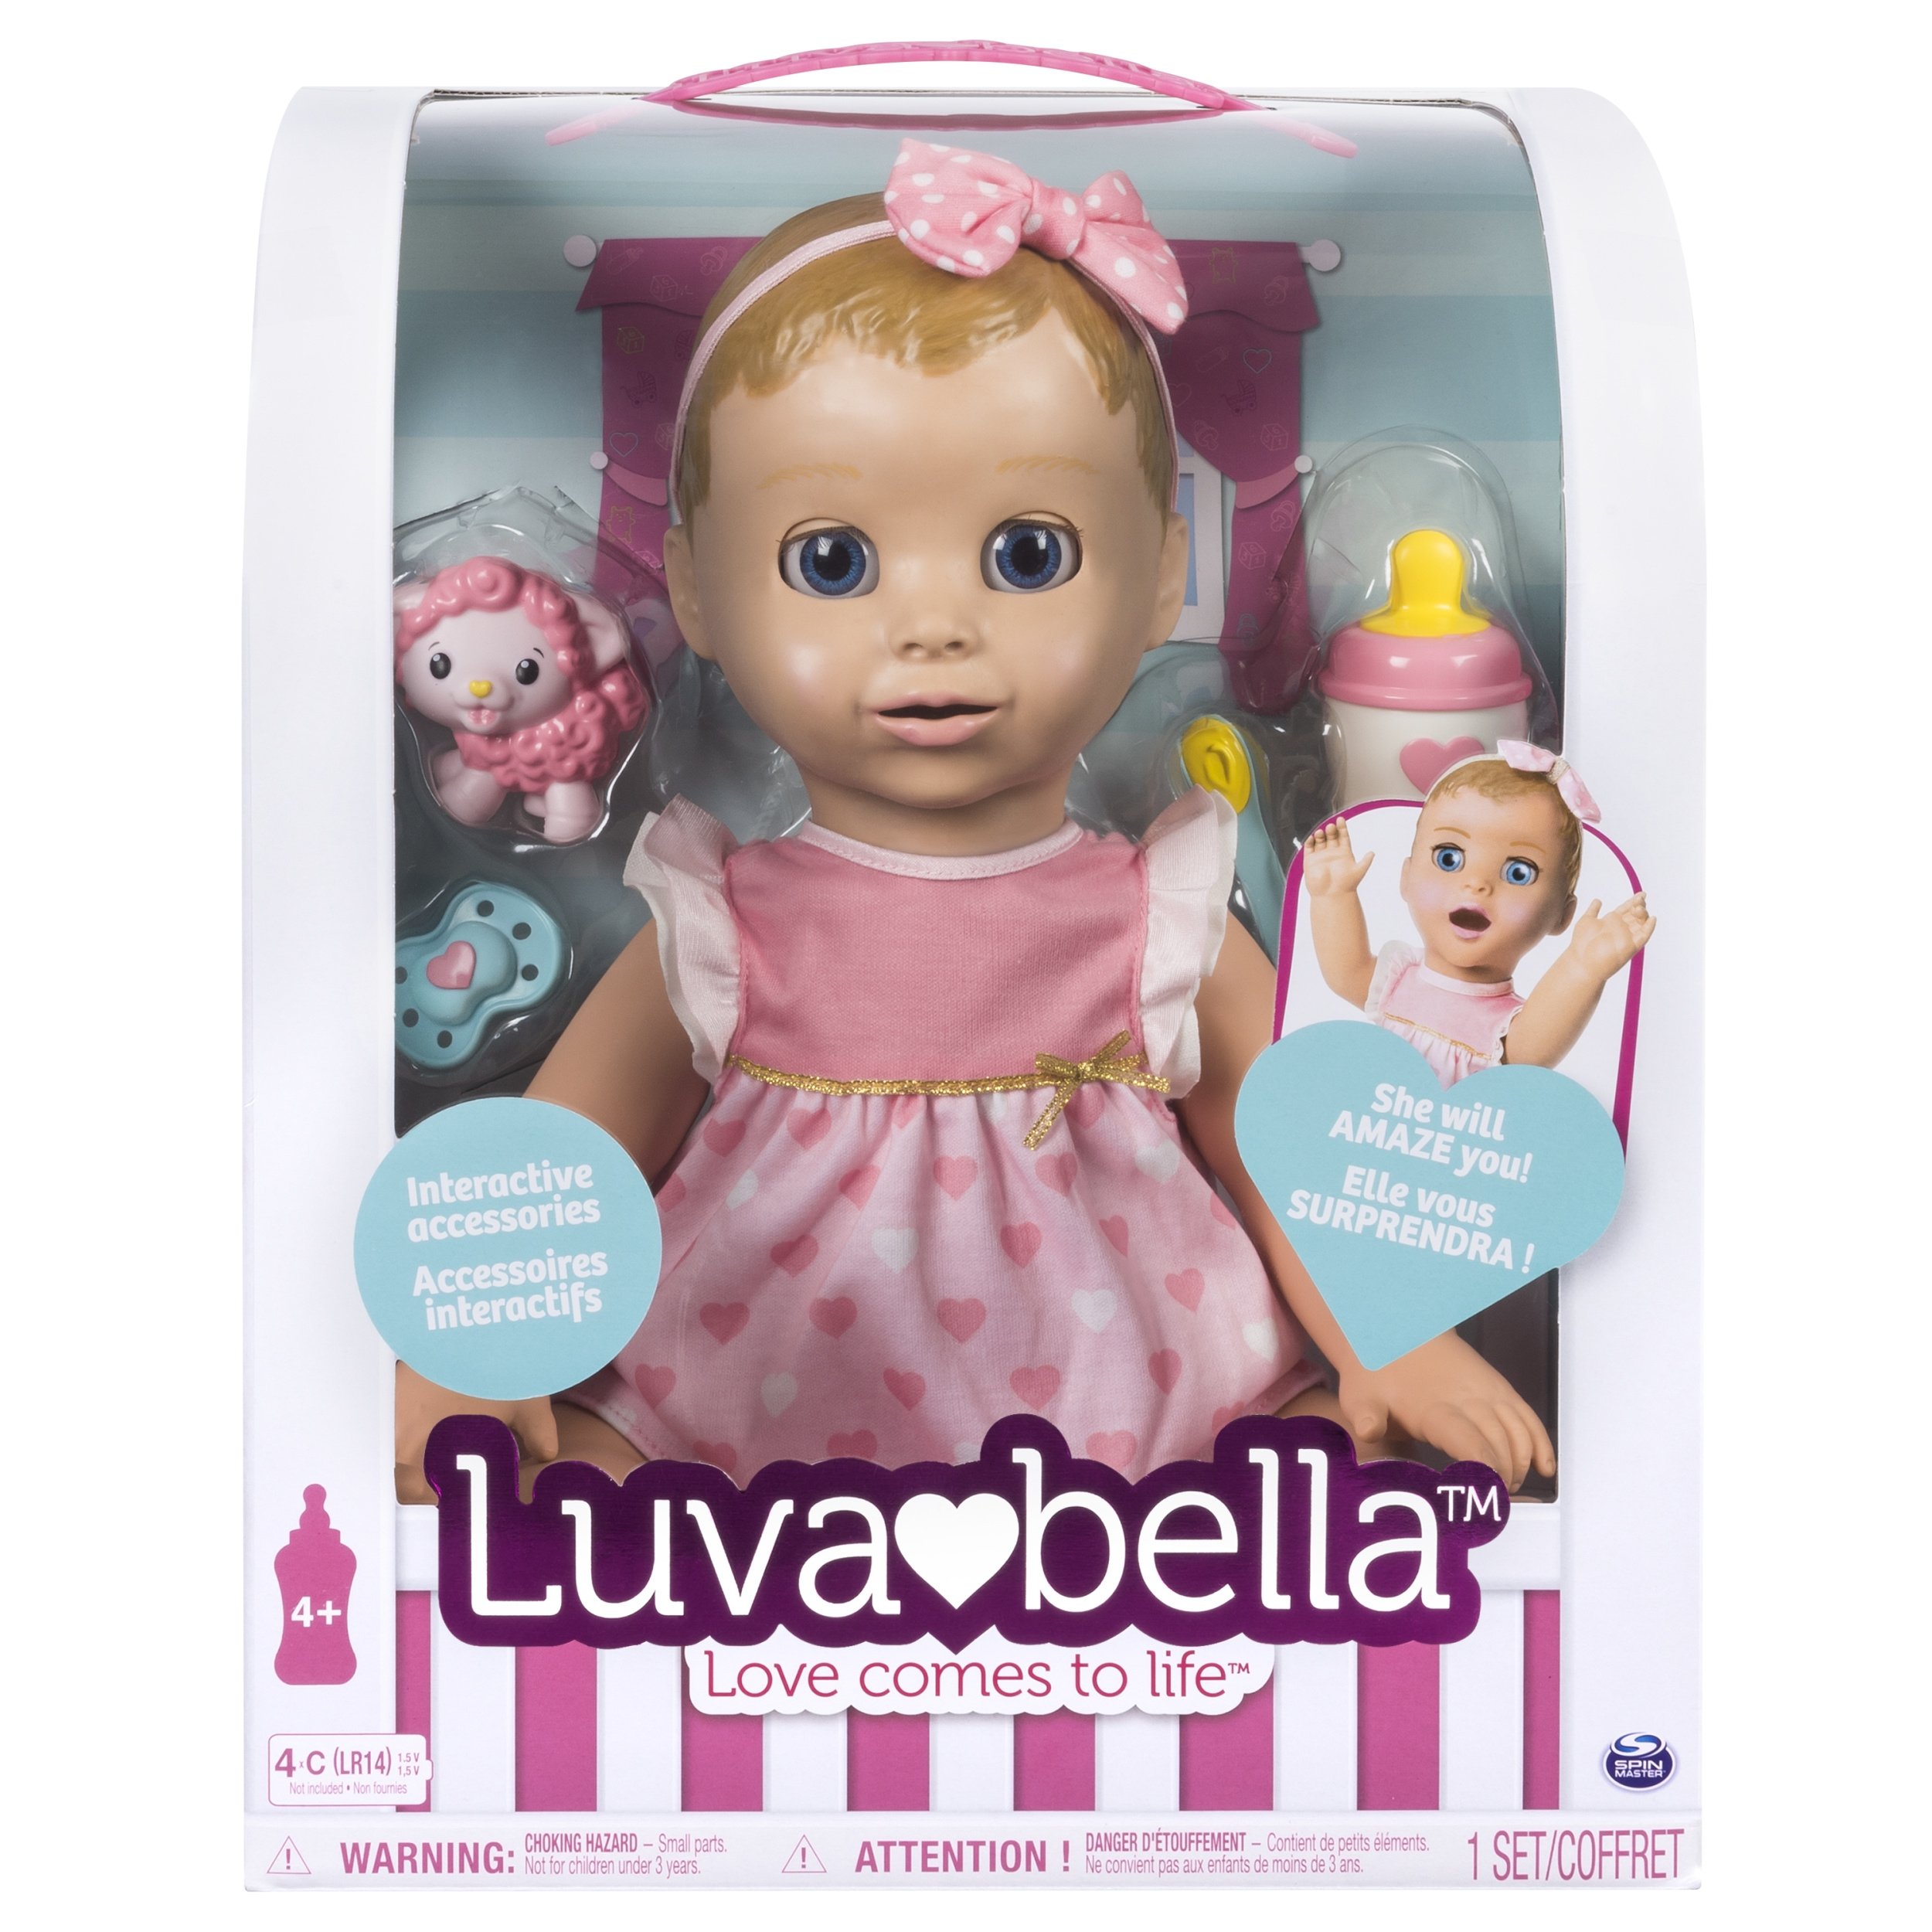 Luvabella - Blonde Hair - Responsive Baby Doll with Realistic Expressions and Movement - image 2 of 8